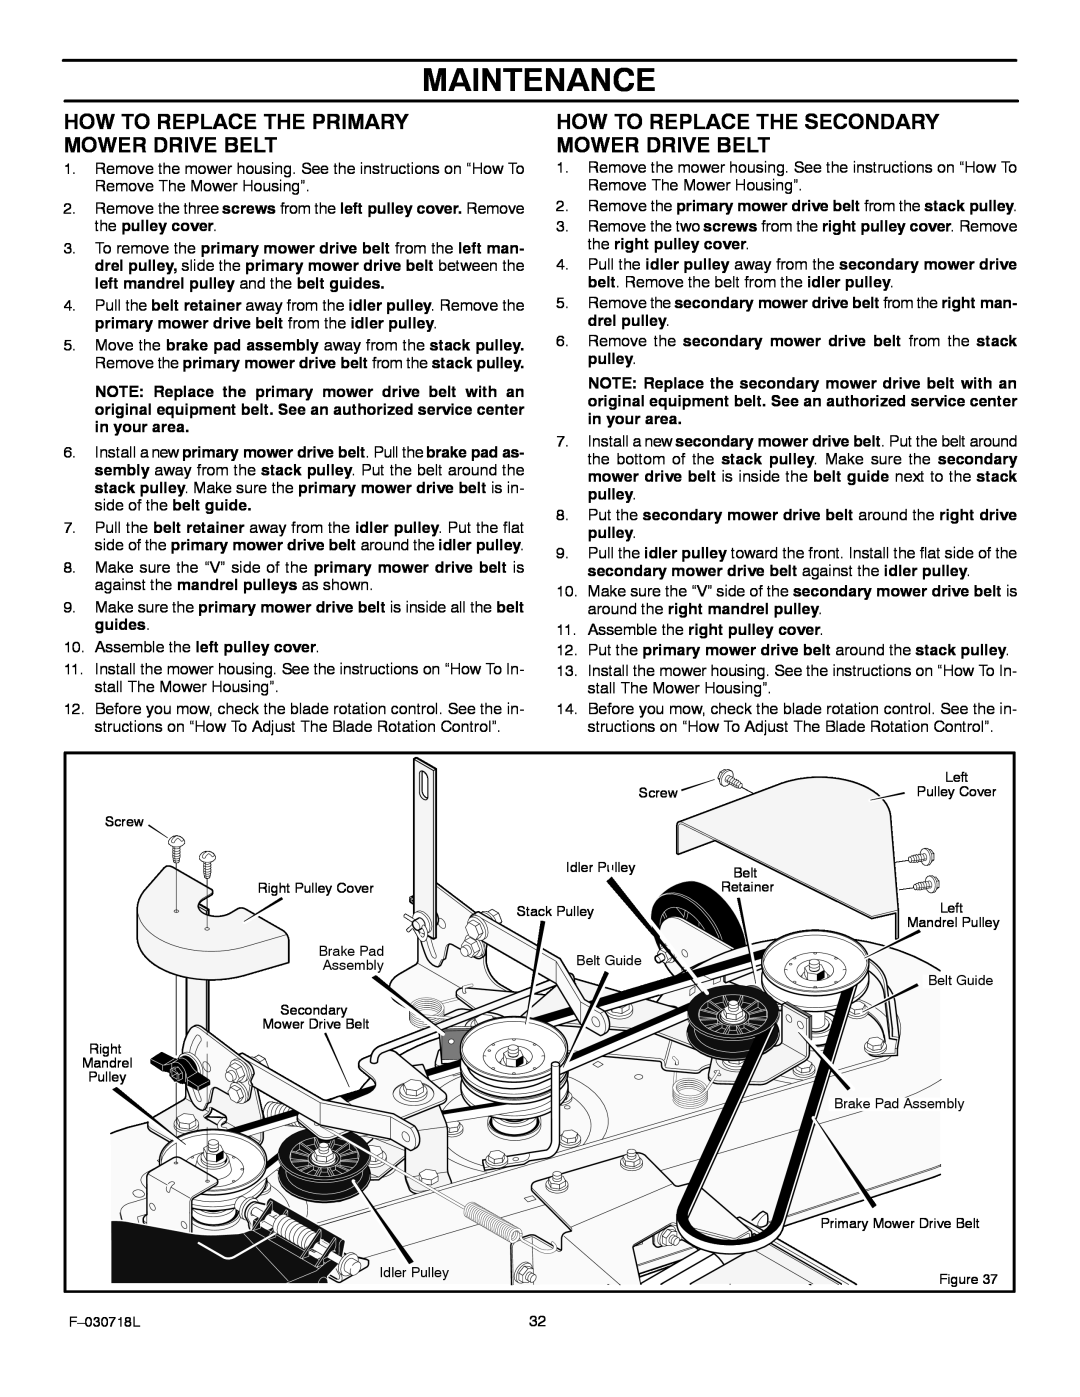 Murray 461000x8A Maintenance, How To Replace The Primary Mower Drive Belt, How To Replace The Secondary Mower Drive Belt 